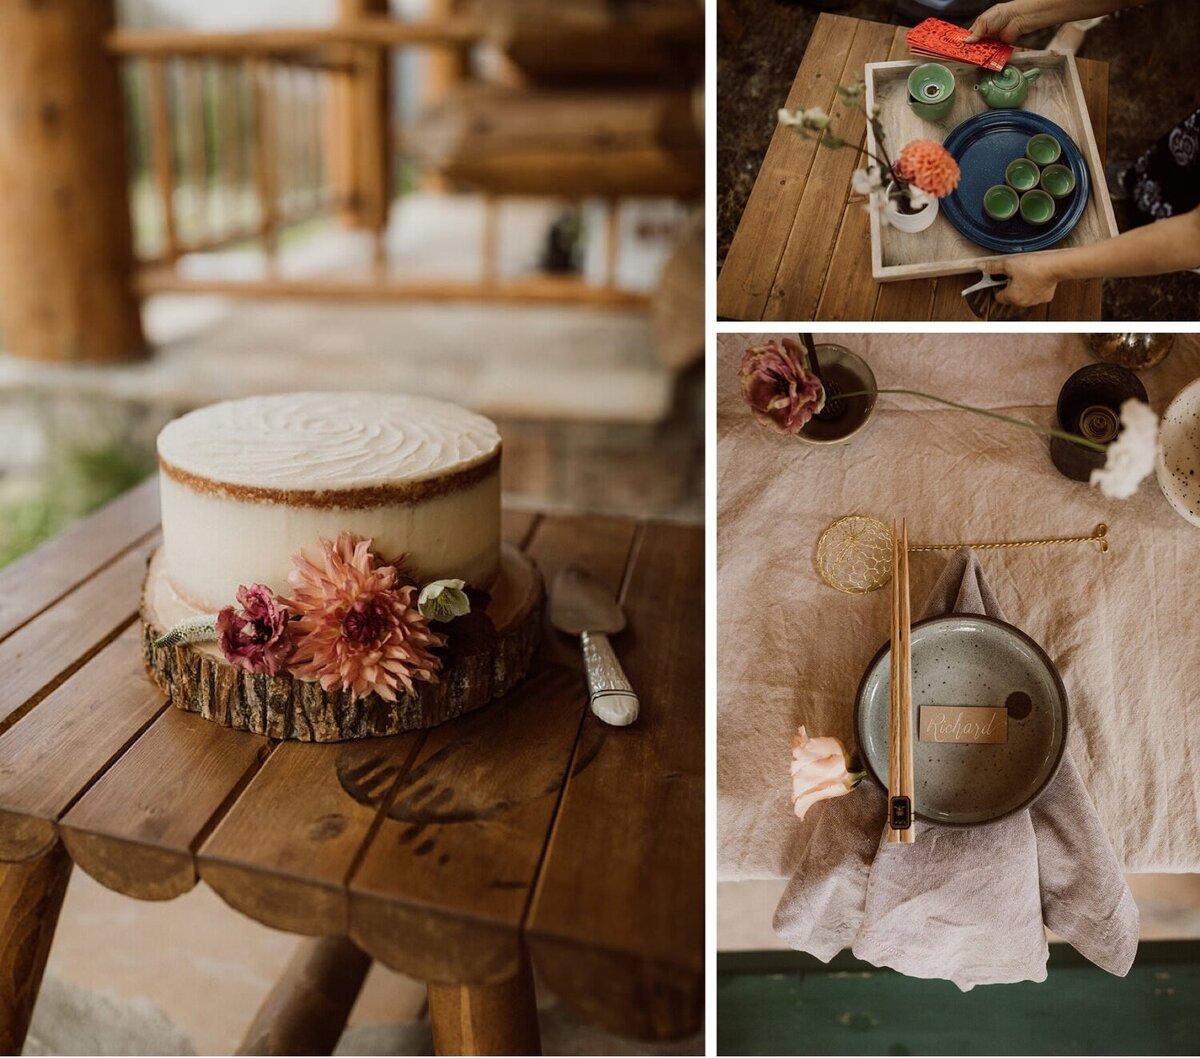 16_naked+wedding+cake+with+flowers+for+elopement_traditional+tea+ceremony+for+mountain+elopement_speckled+plates+elopement+design+tablescape